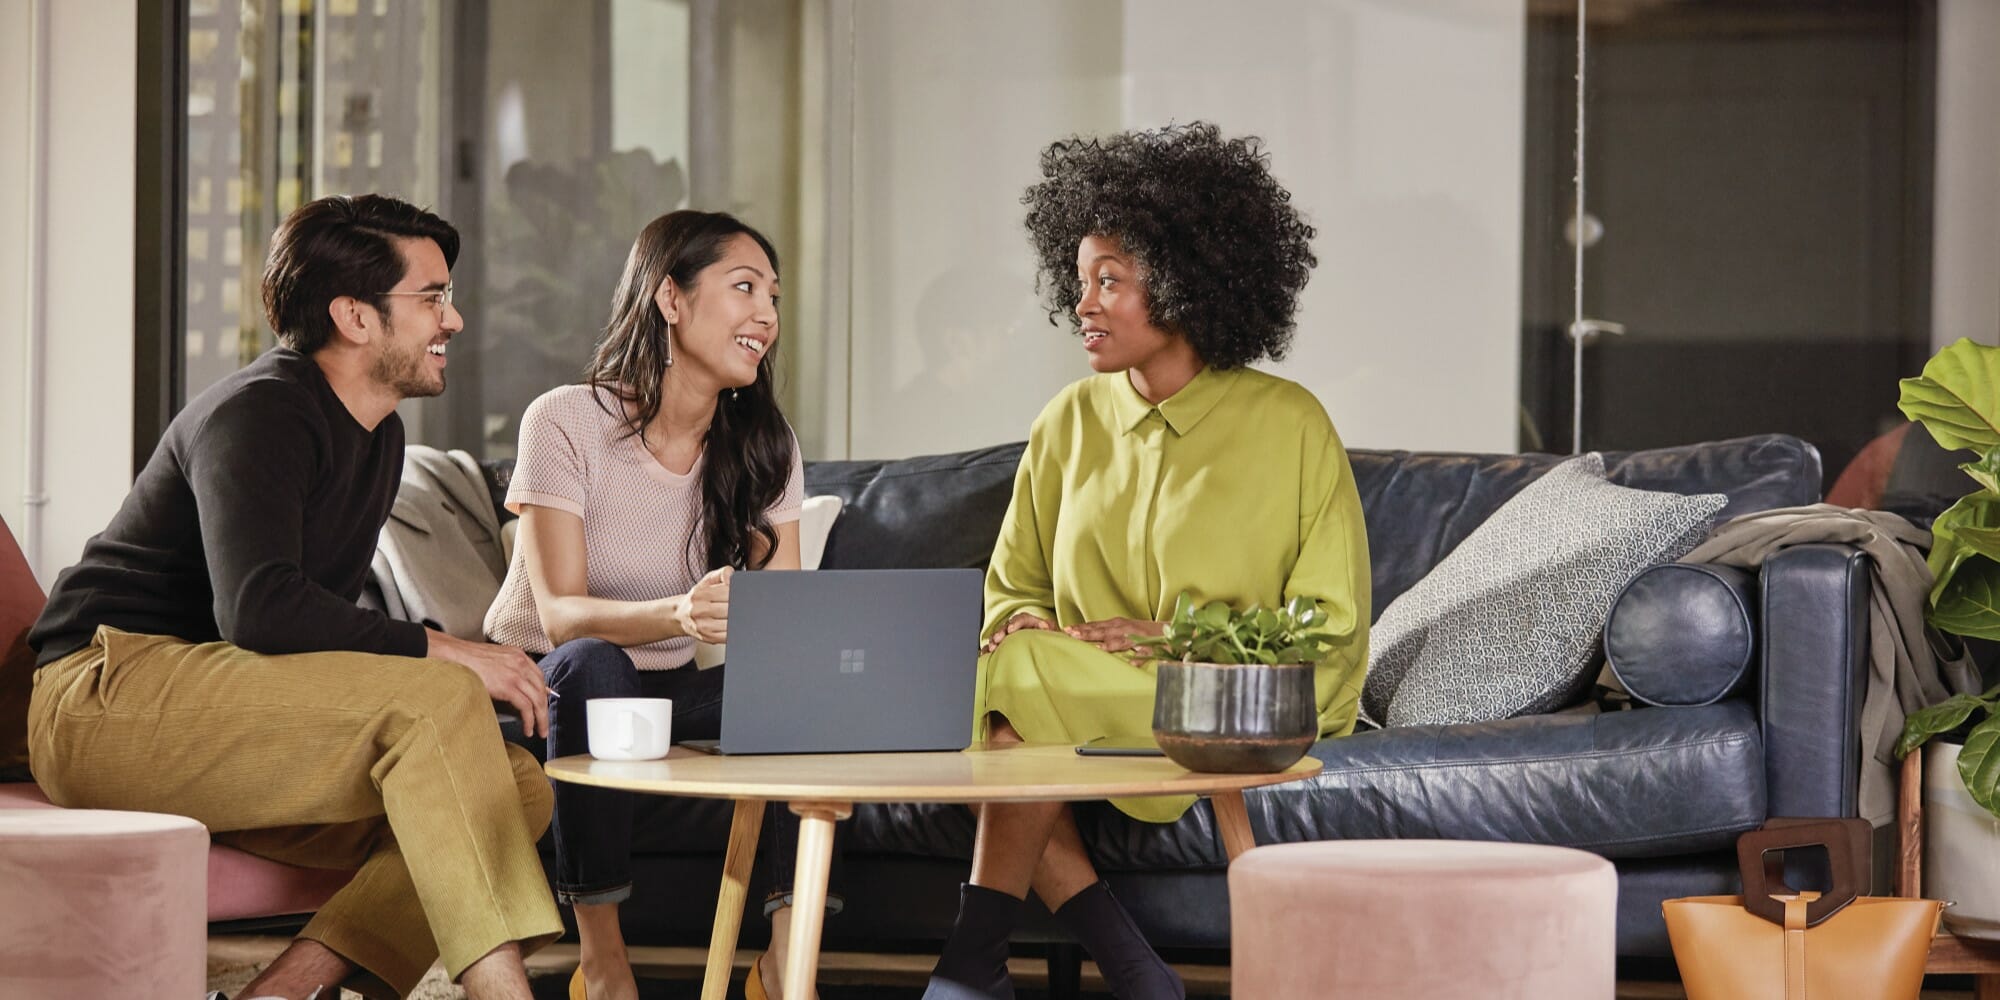 Employees collaborate in front of Surface devices